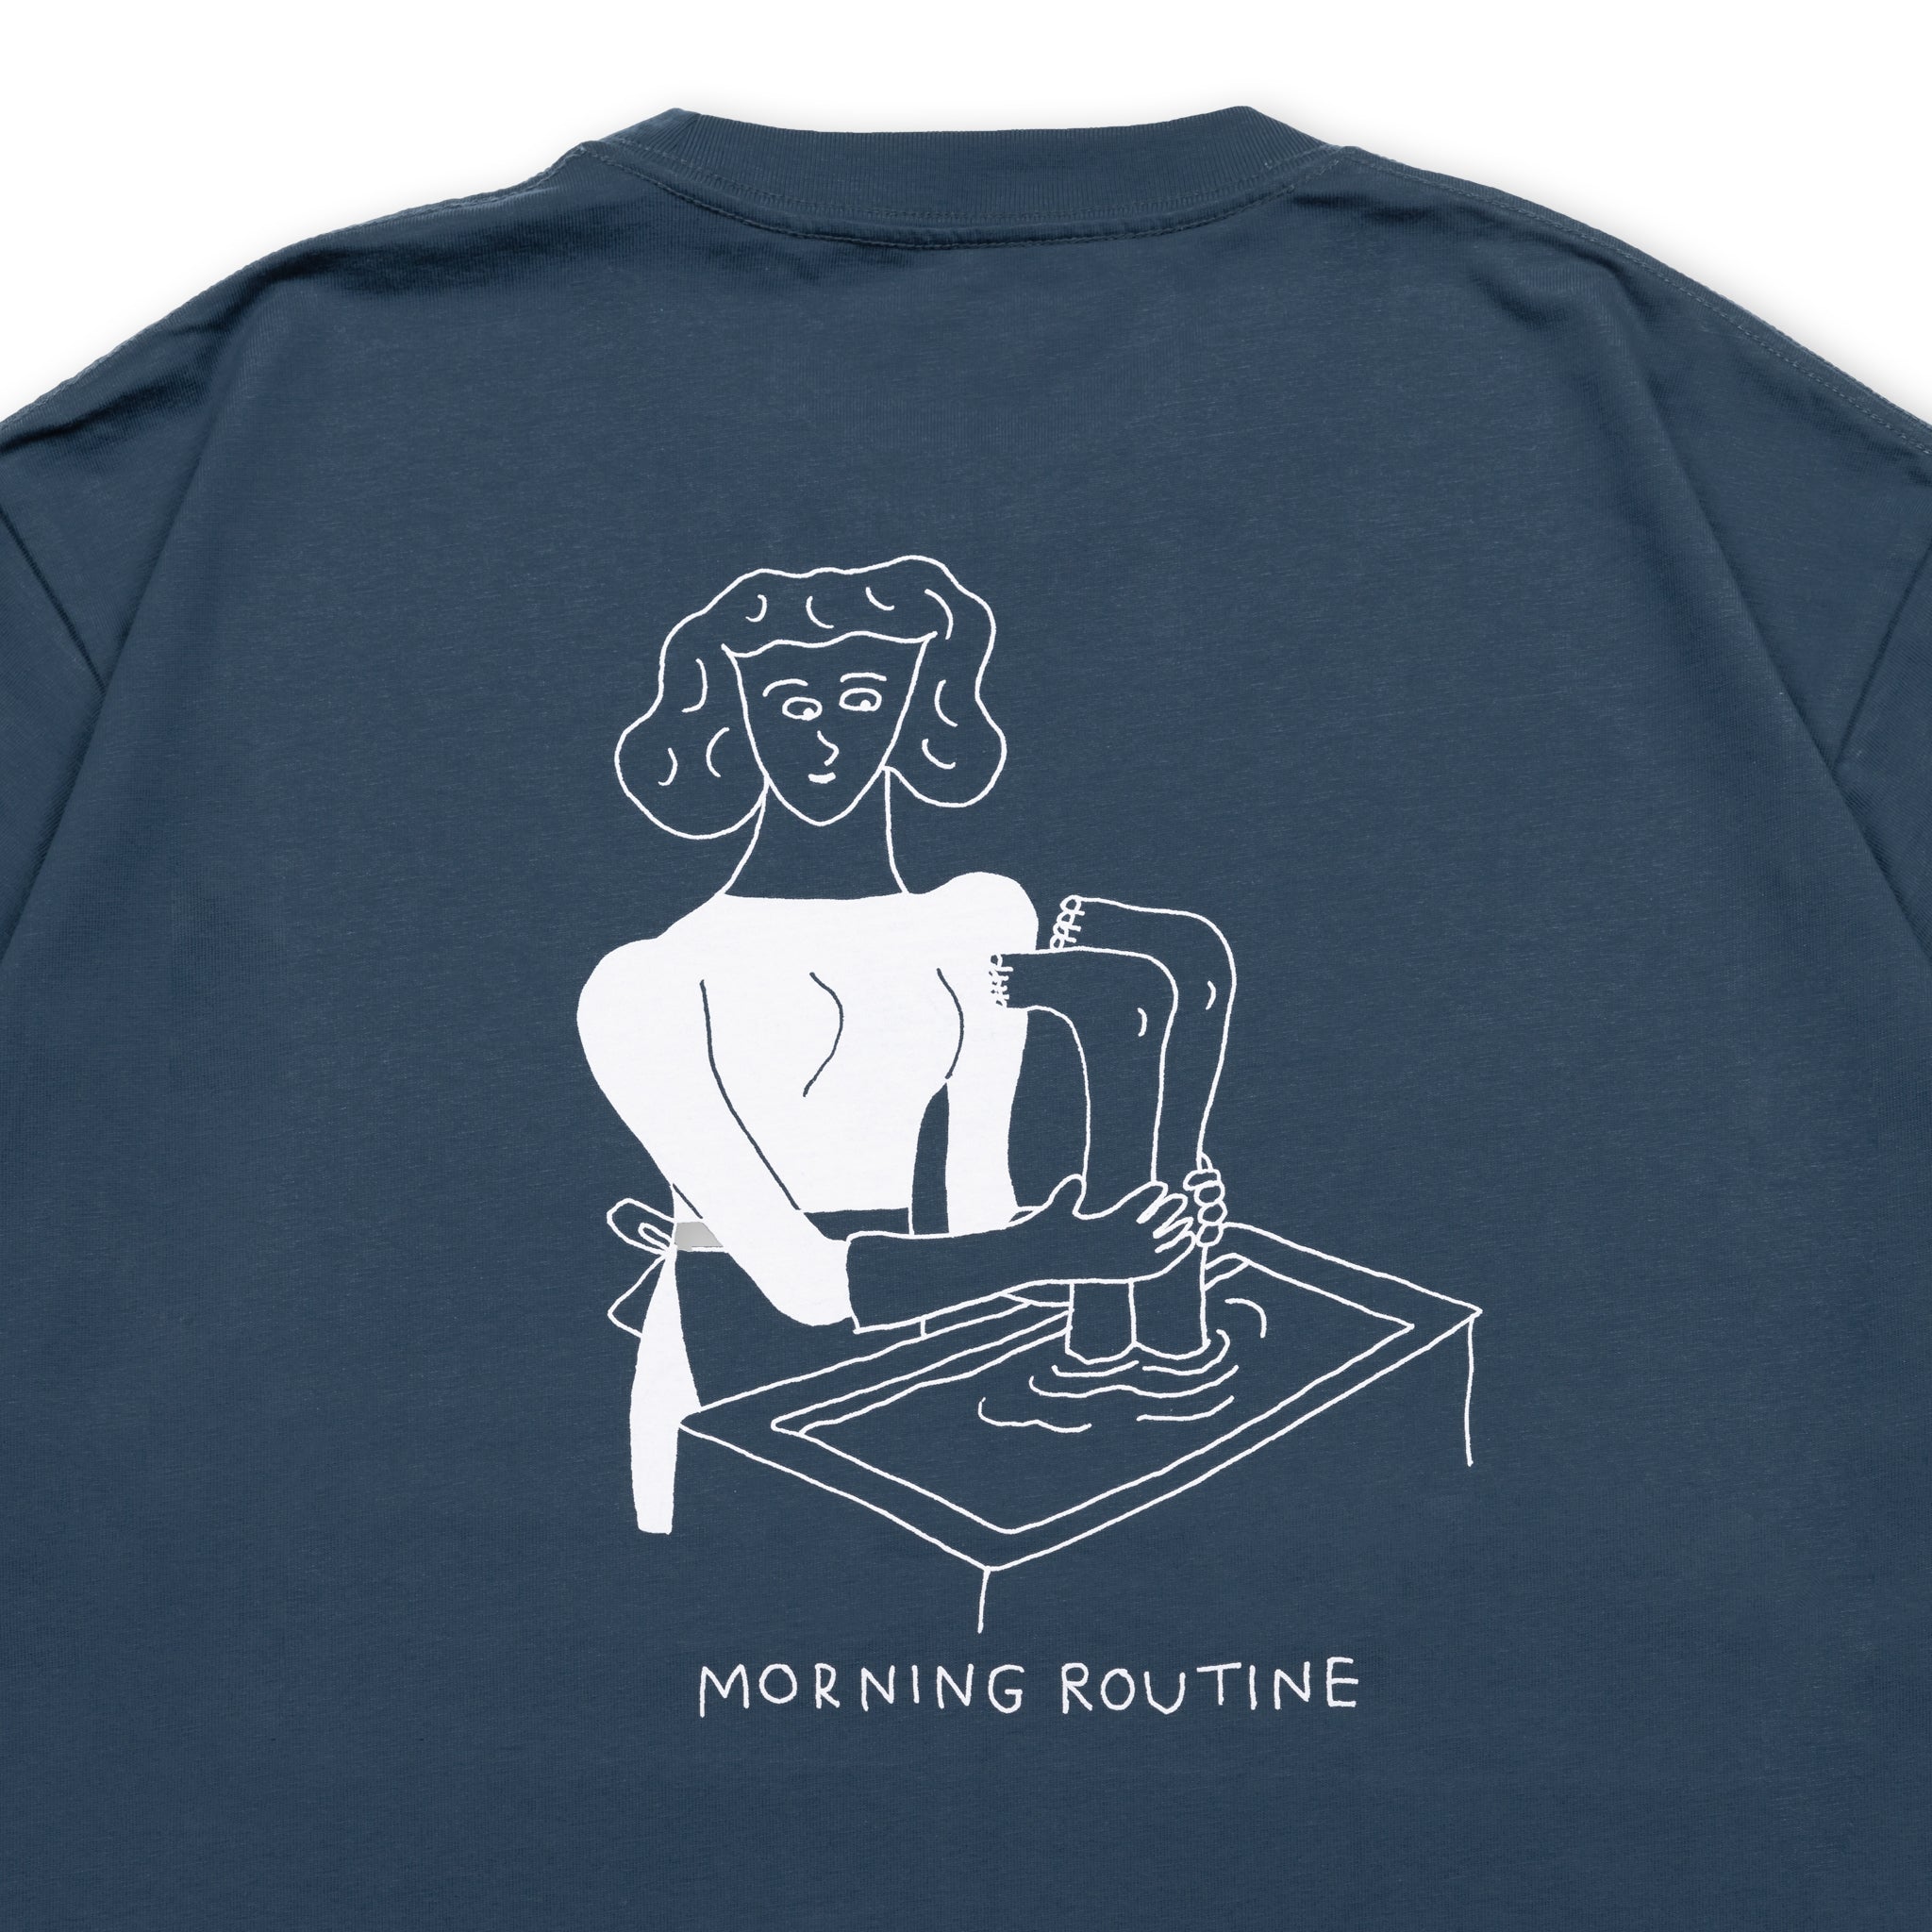 MORNING ROUTINE Tシャツ